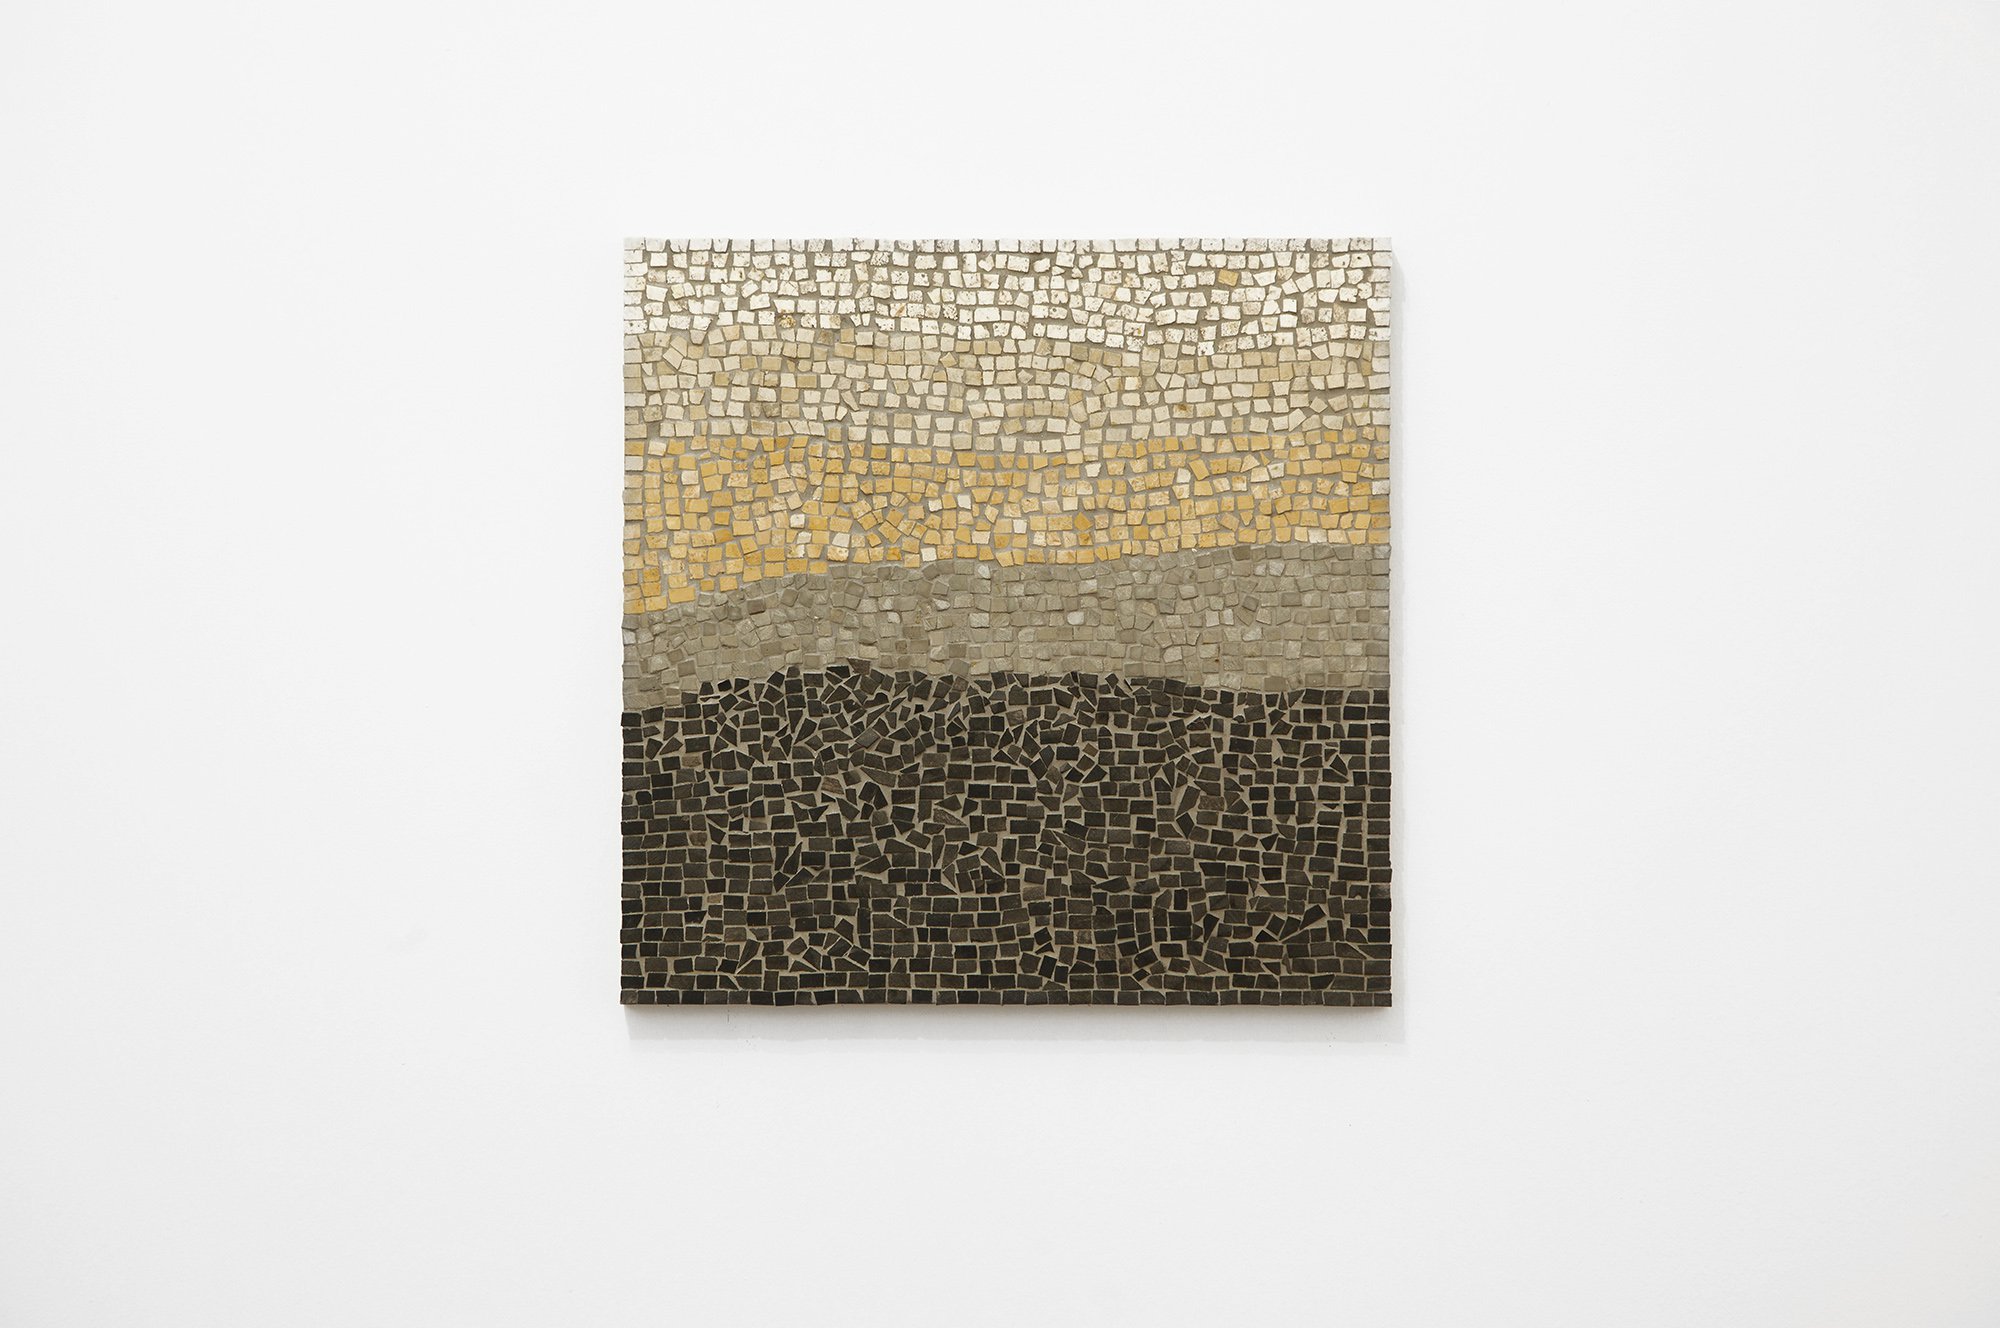 Christodoulos Panayiotou, Untitled, mosaic, natural stones, wooden base, 40 x 40 cm, 2012. Installation view, Tenuto, Rodeo, Istanbul, 2012 – 2013